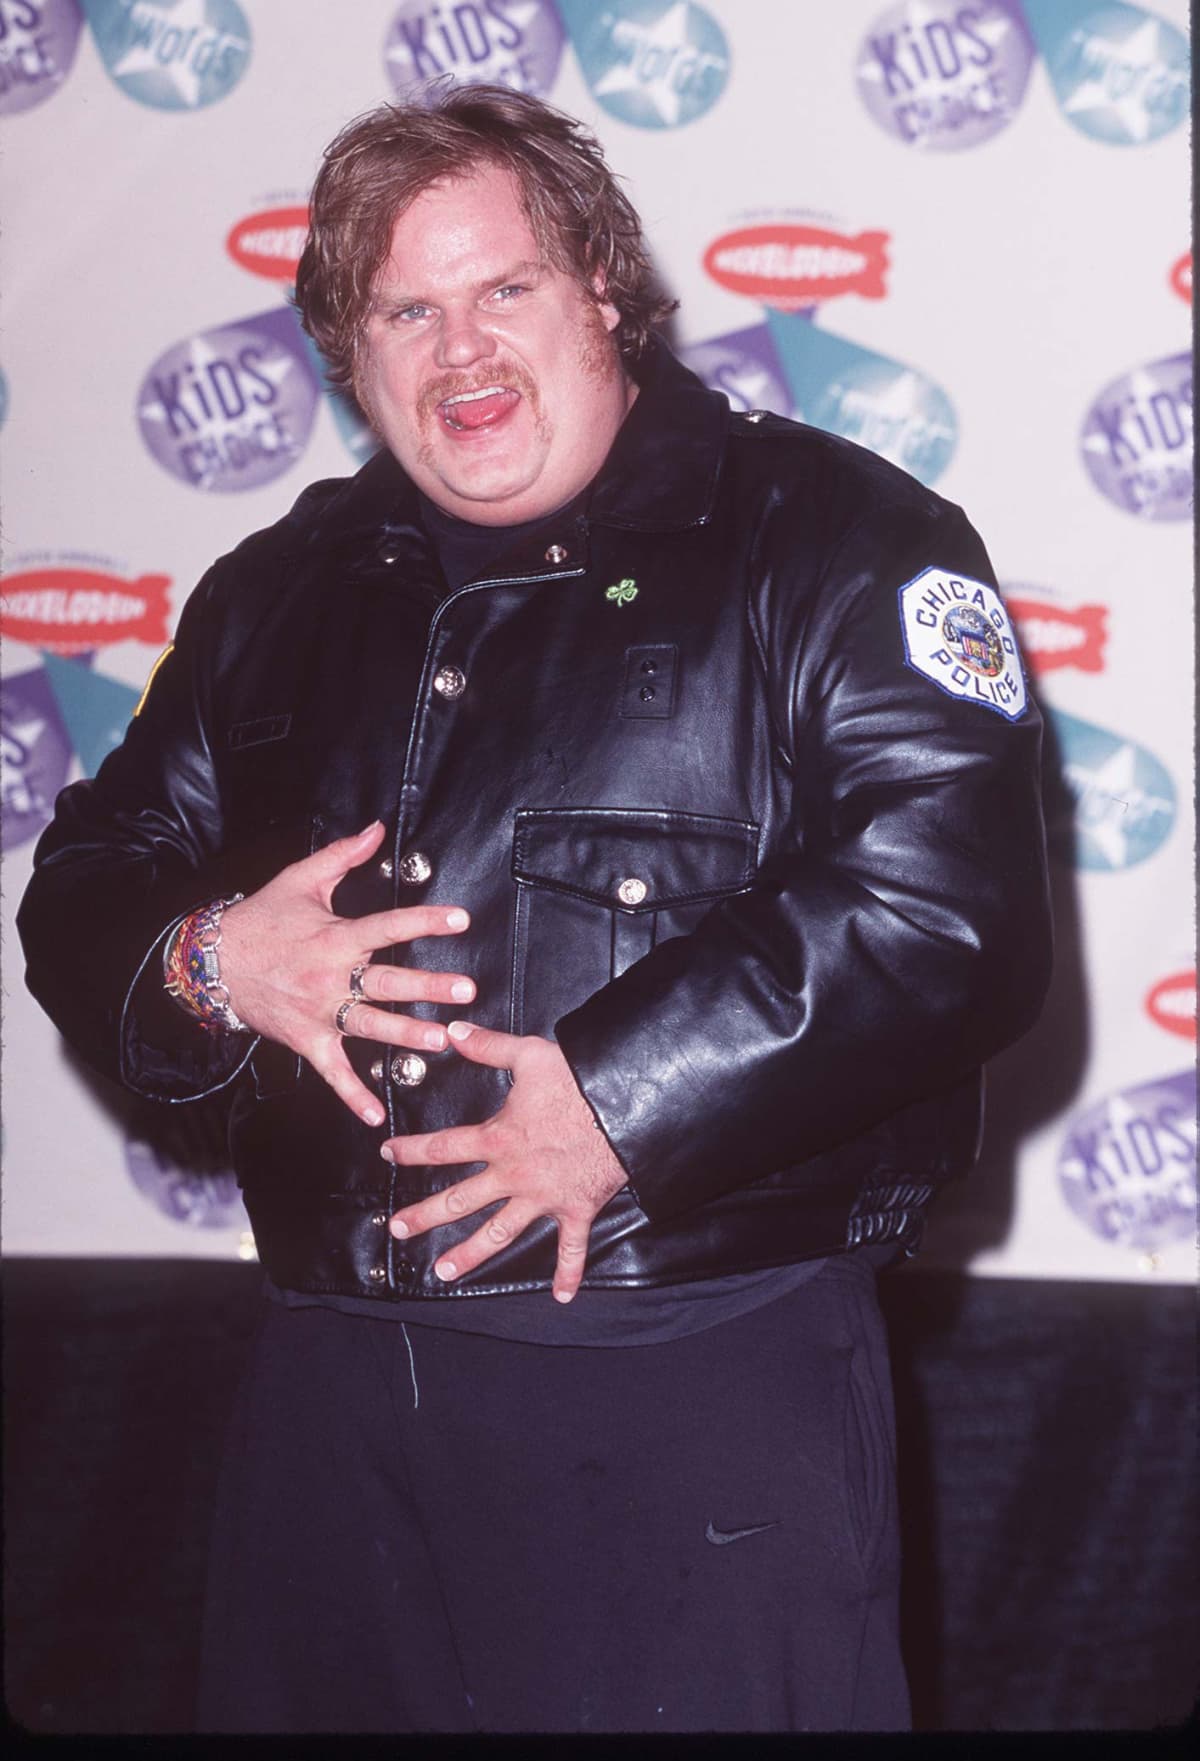 Chris Farley at the Chris Farley by George Pimentel in Toronto, Canada. (Photo by George Pimentel/WireImage)